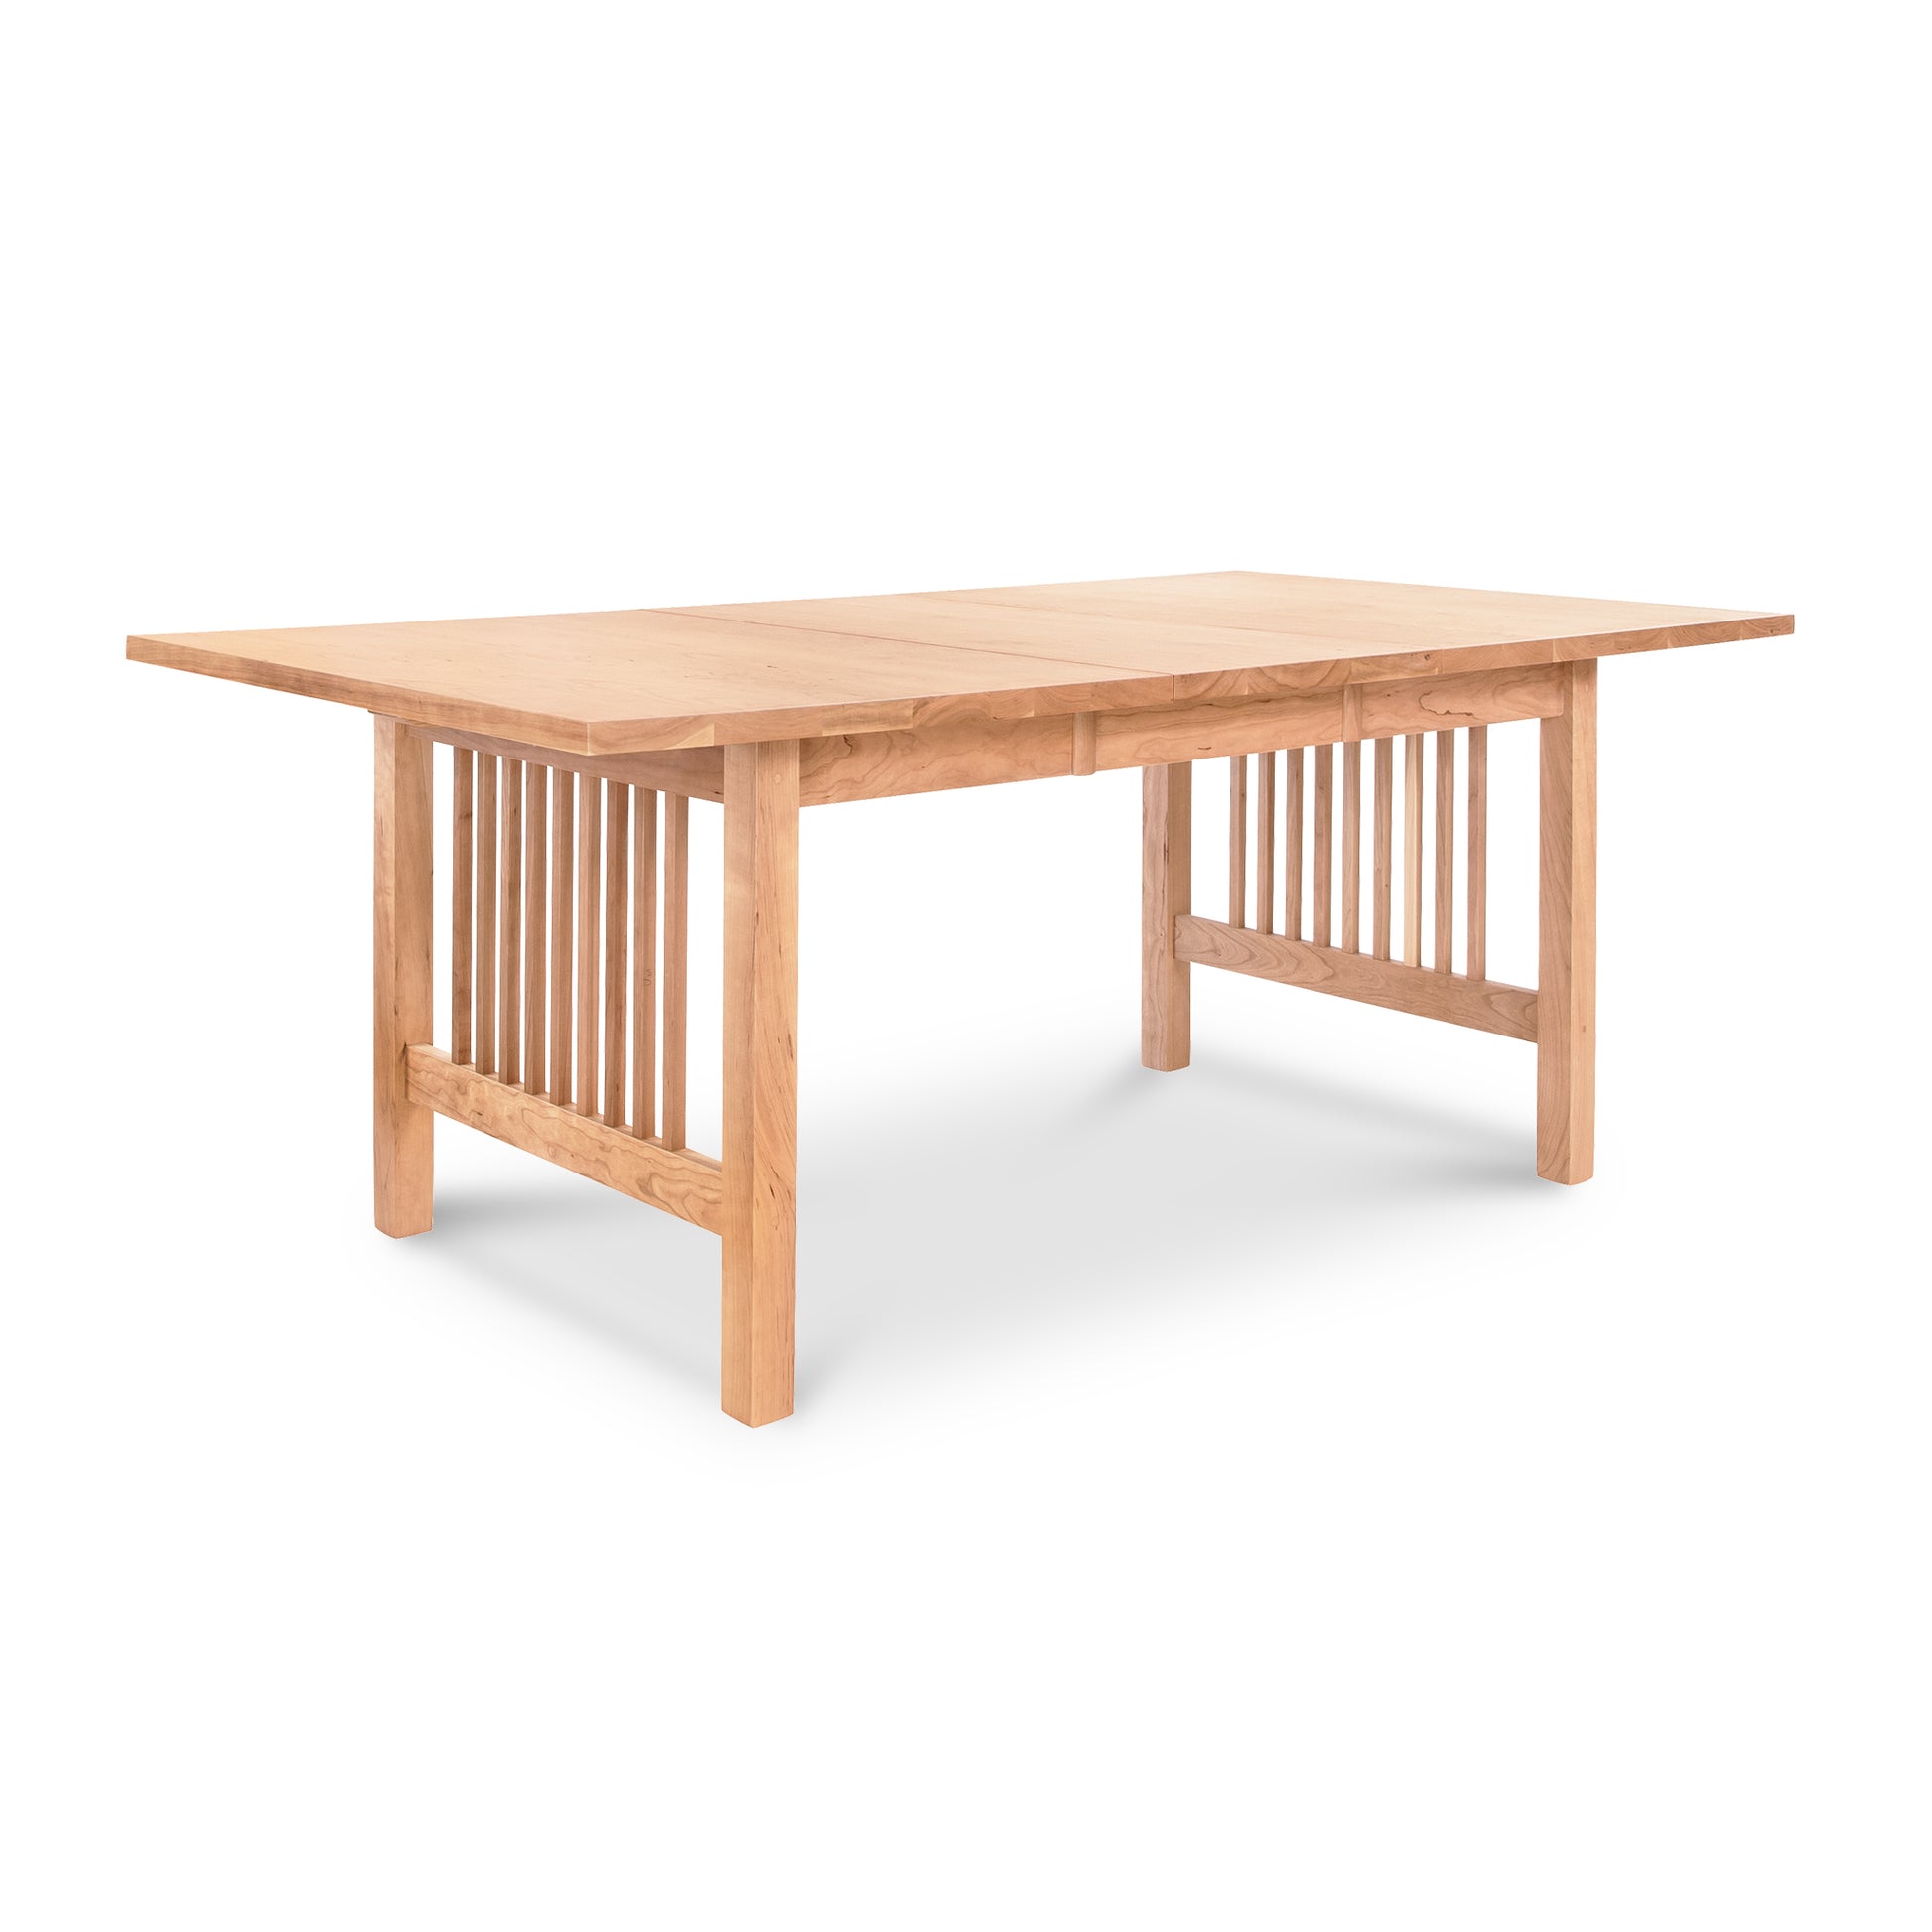 An American Mission Extension Dining Table from Lyndon Furniture with a solid natural wood construction and a wooden top.